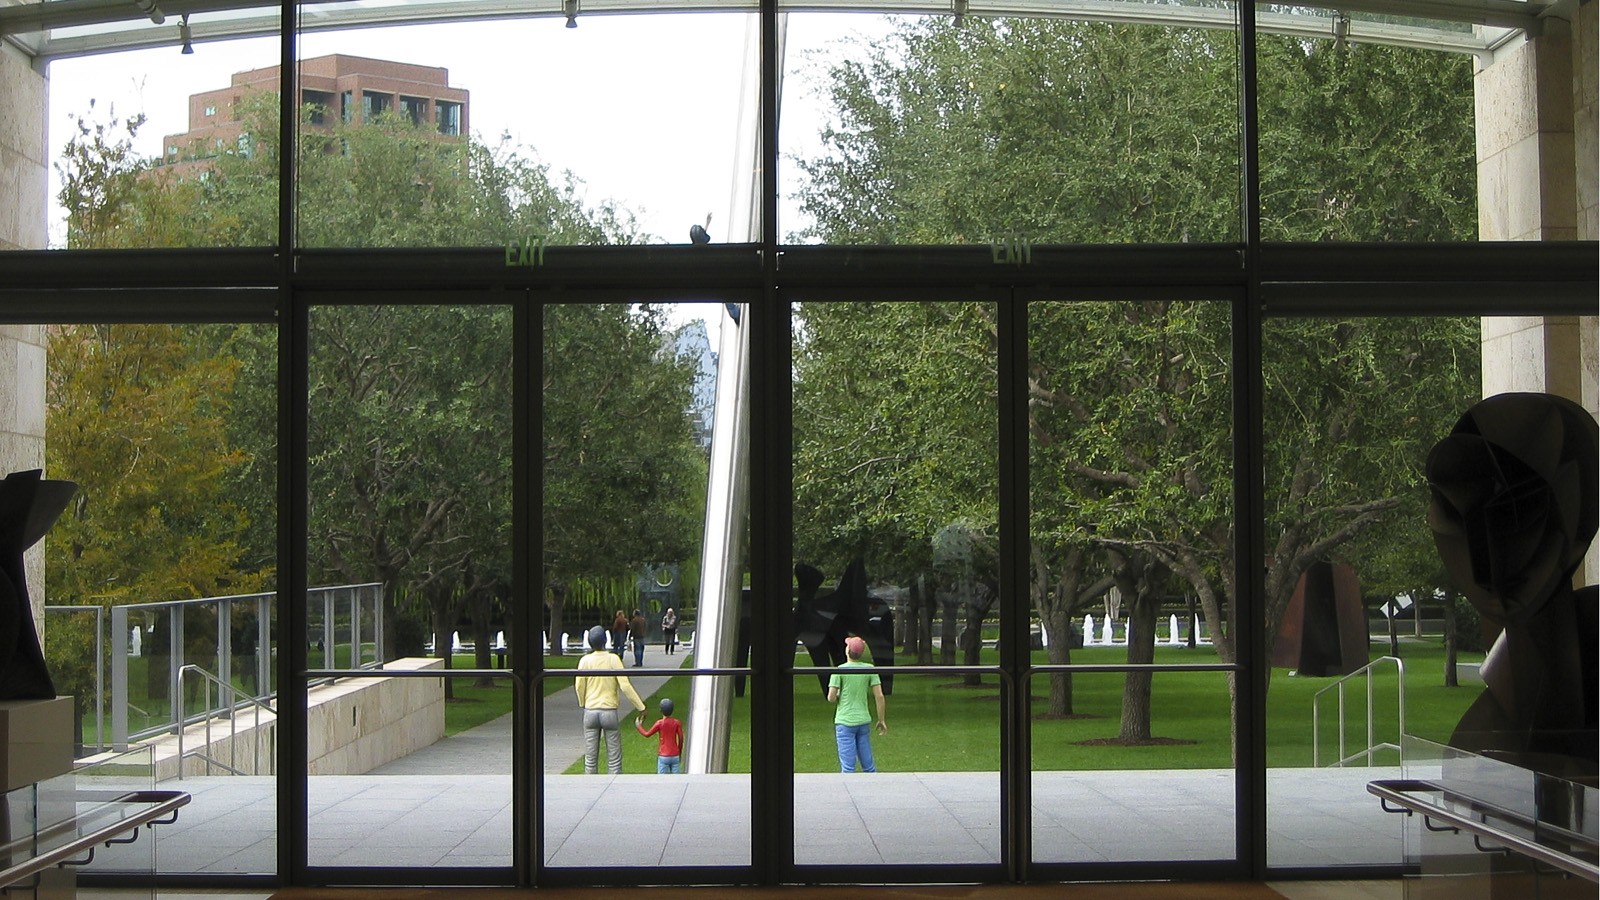 View of Nasher Sculpture Garden from inside the museum